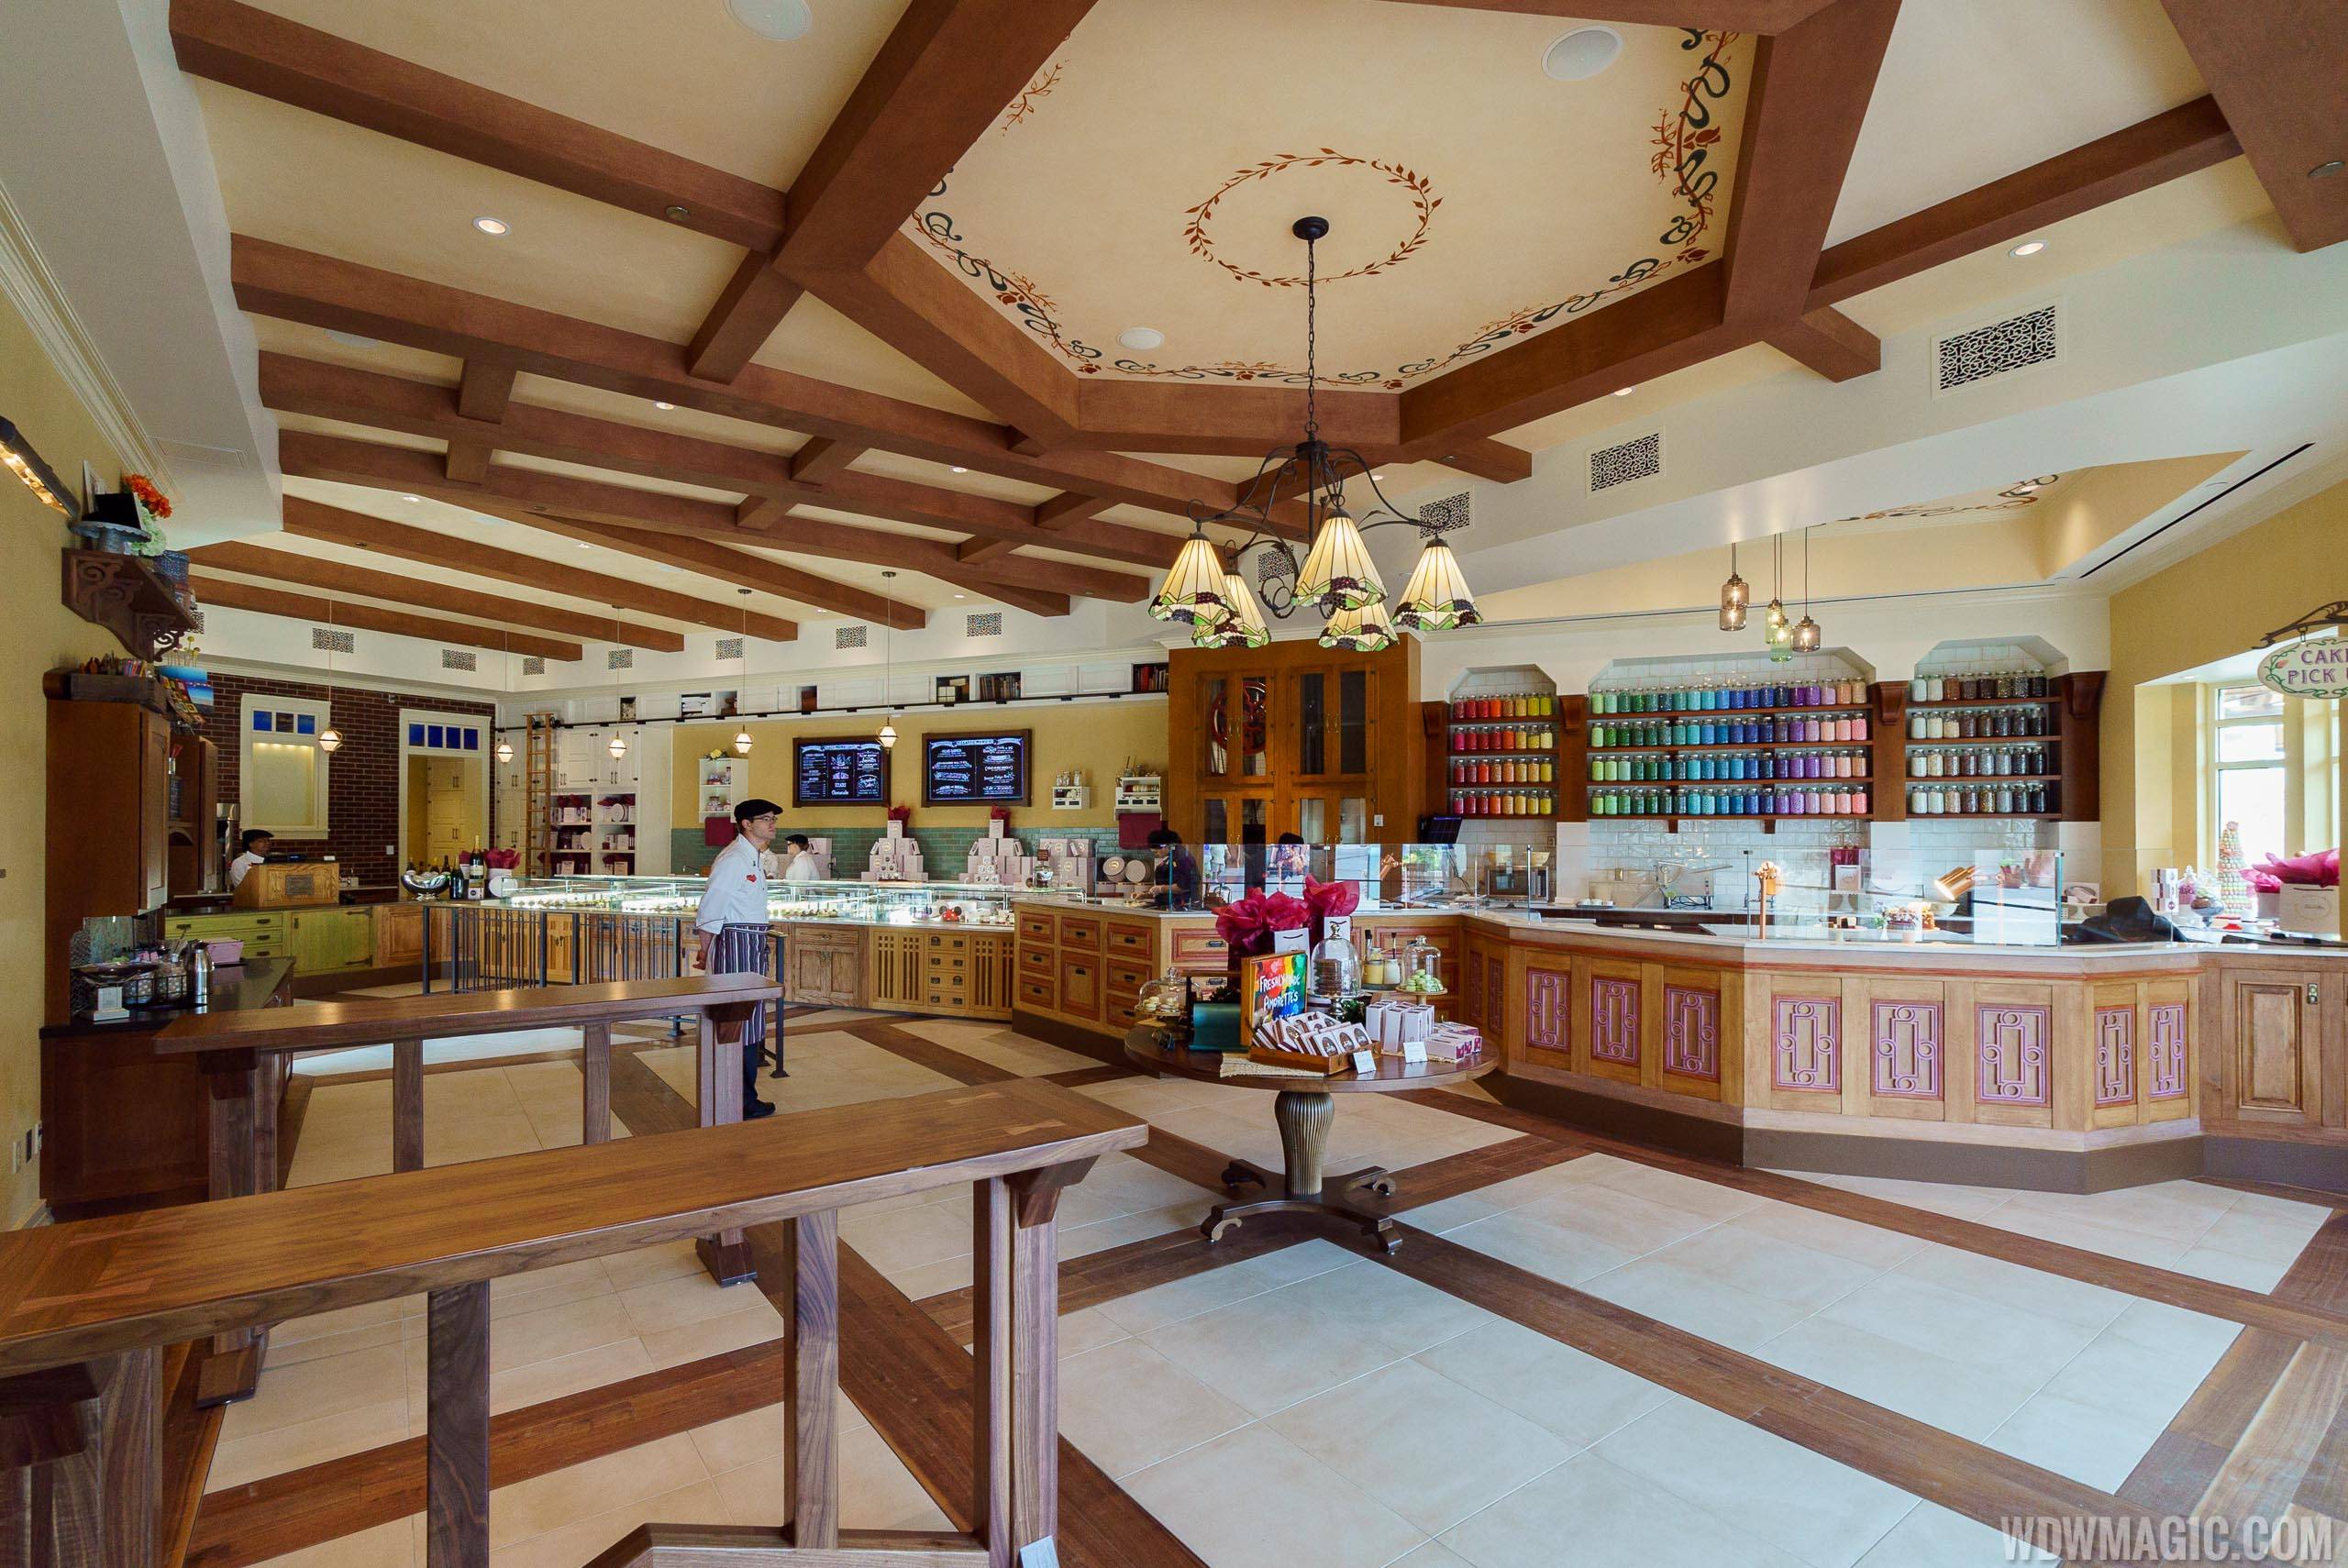 Mobile Order is now available at Amorette's Patisserie at Disney Springs